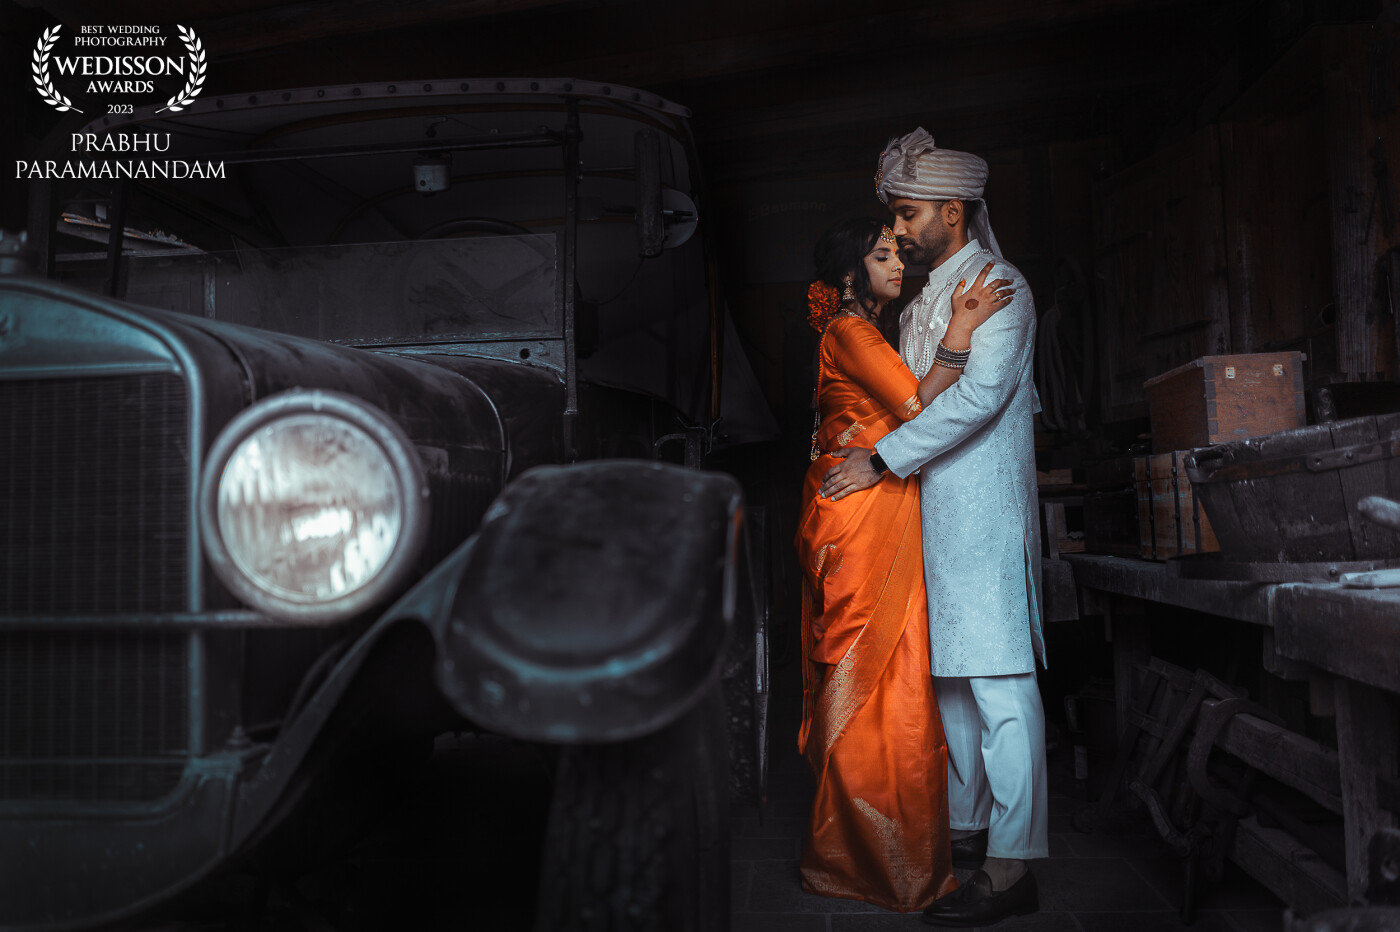 This frame screams rustic and warmth. The vintage beauty along with the stunning couple compliment each other to the T. The car was so alluring that I had to frame it in such a way that the focus was evenly distributed. Phew!!the view though .